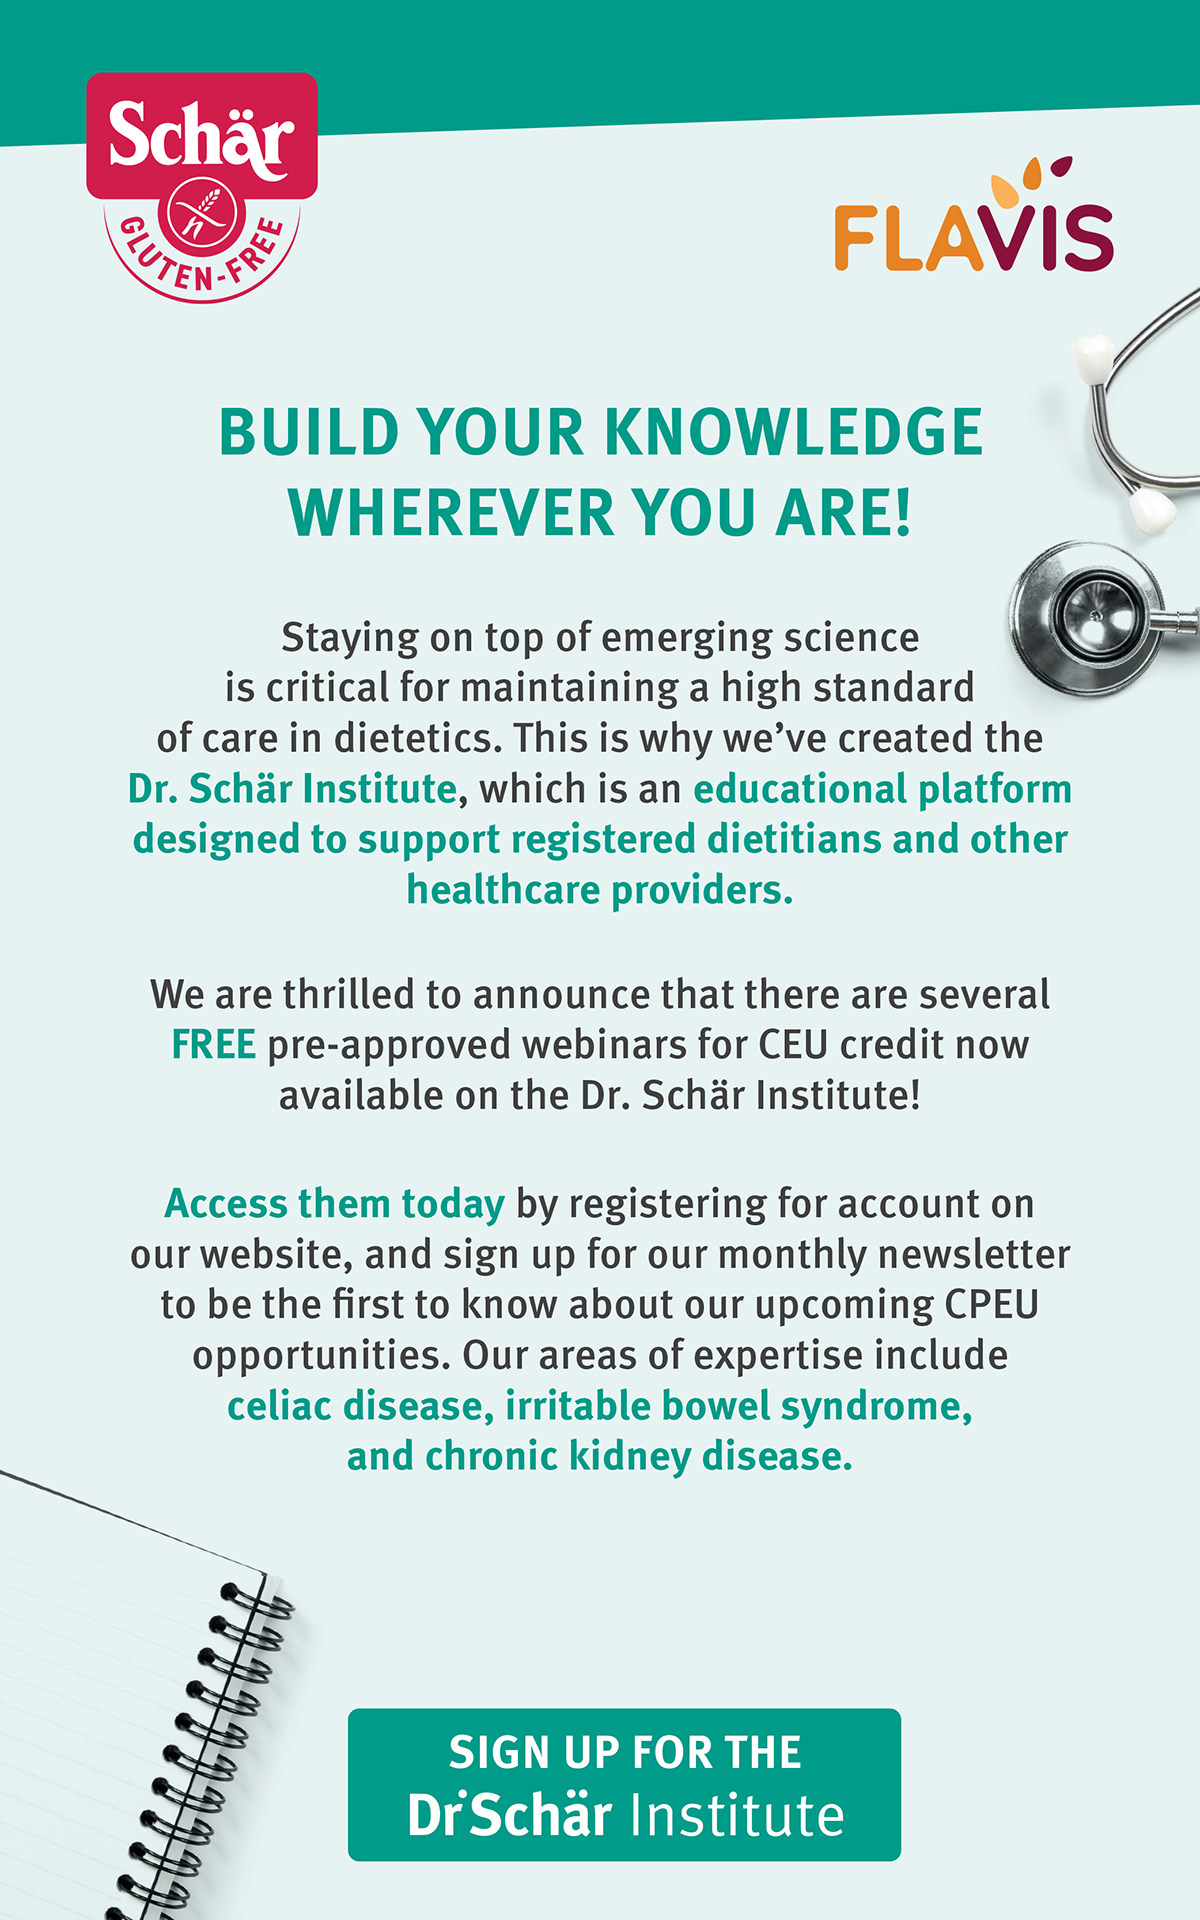 Dr. Schär Institute | BUILD YOUR KNOWLEDGE WHEREVER YOU ARE! Staying on top of emerging science is critical for maintaining a high standard of care in dietetics. This is why we’ve created the Dr. Schär Institute, which is an educational platform designed to support registered dietitians and otherhealthcare providers. We are thrilled to announce that there are several FREE pre-approved webinars for CEU credit now available on the Dr. Schär Institute! Access them today by registering for account on our website, and sign up for our monthly newsletter to be the first to know about our upcoming CPEU opportunities. Our areas of expertise include celiac disease, irritable bowel syndrome, and chronic kidney disease. Sign Up For The Dr. Schär Institute: https://www.drschaer.com/us/institute/webinars